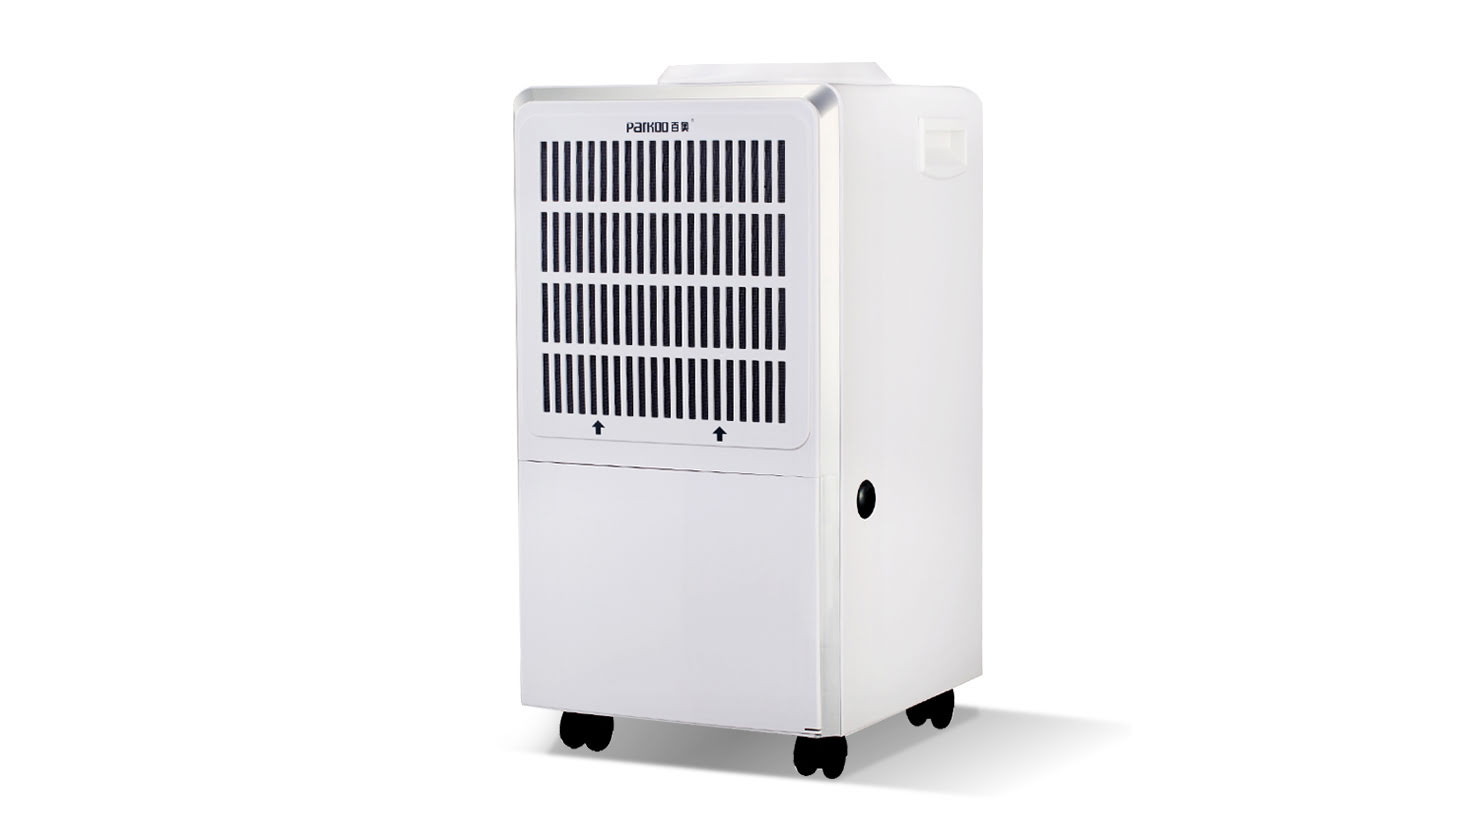 Dehumidifier and air conditioning dehumidification which effect is good today for you to analyze in detail